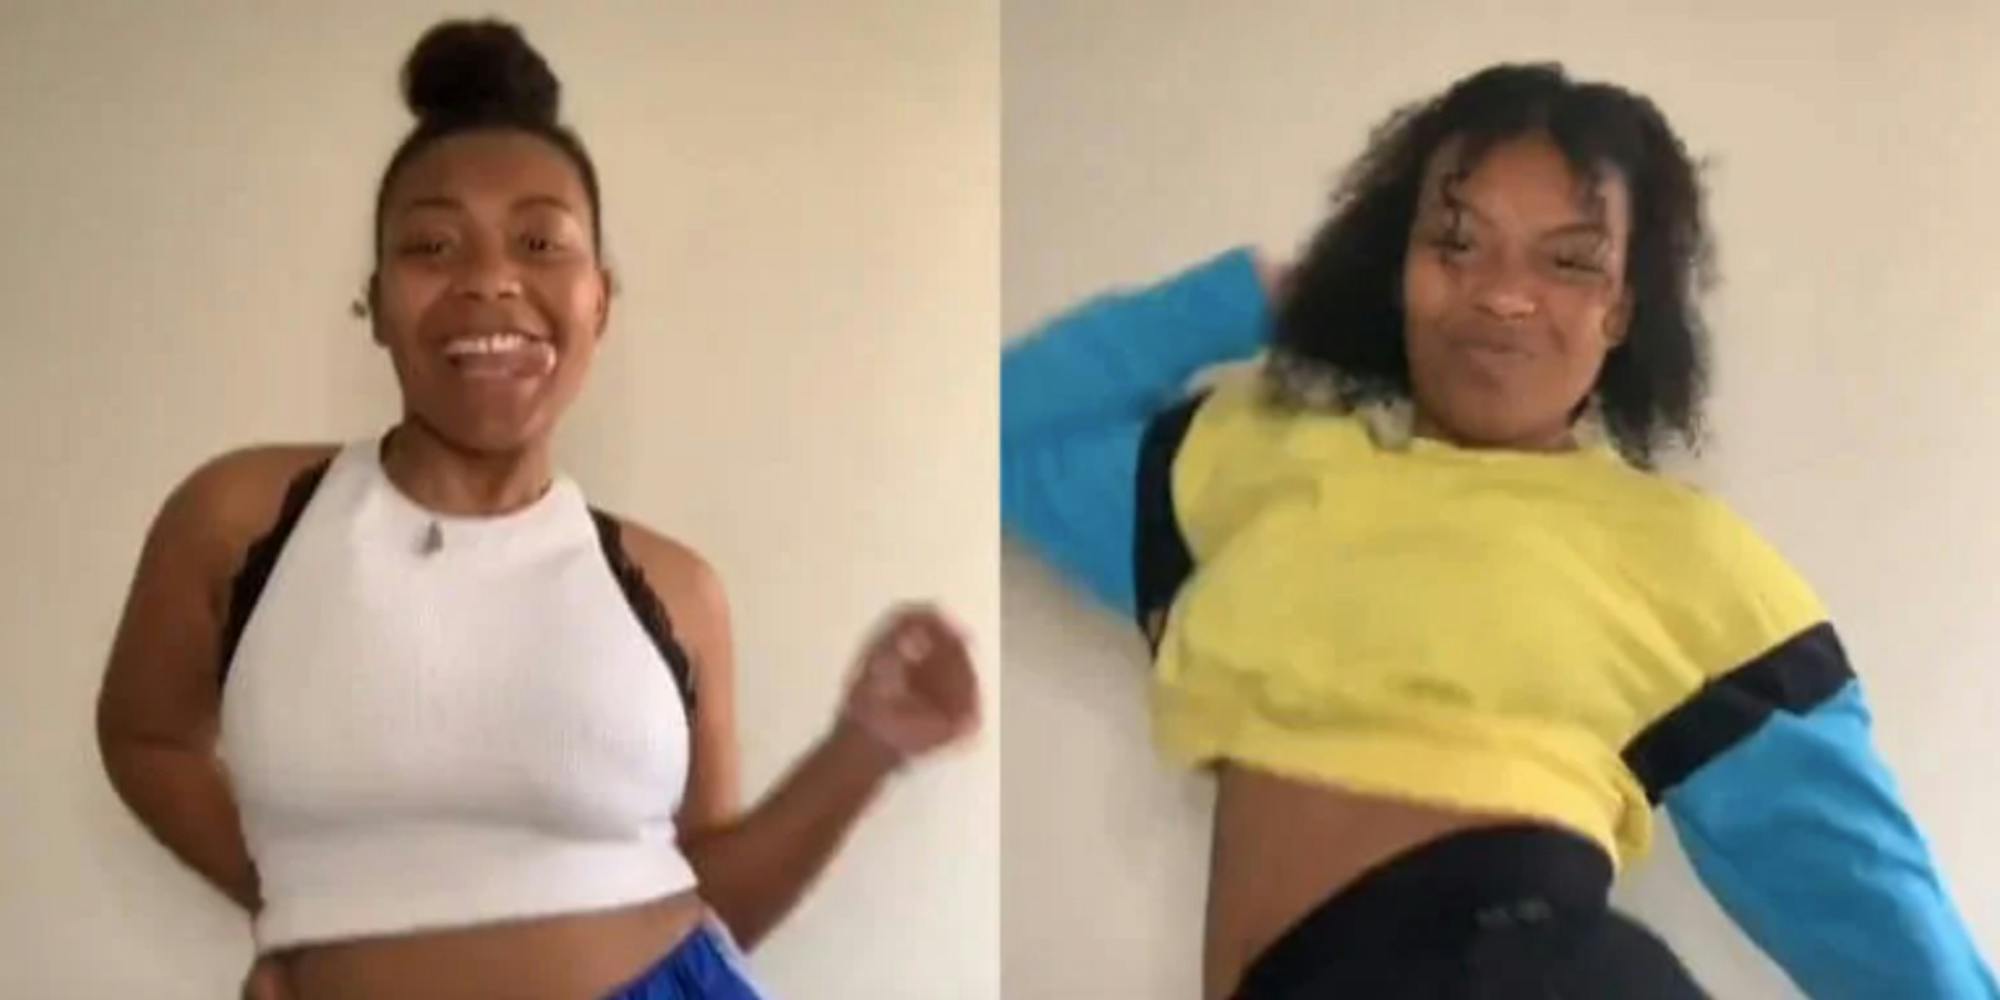 Two screenshots show a young Black woman, @keke.janajah, dancing to "Savage" in two different outfits.